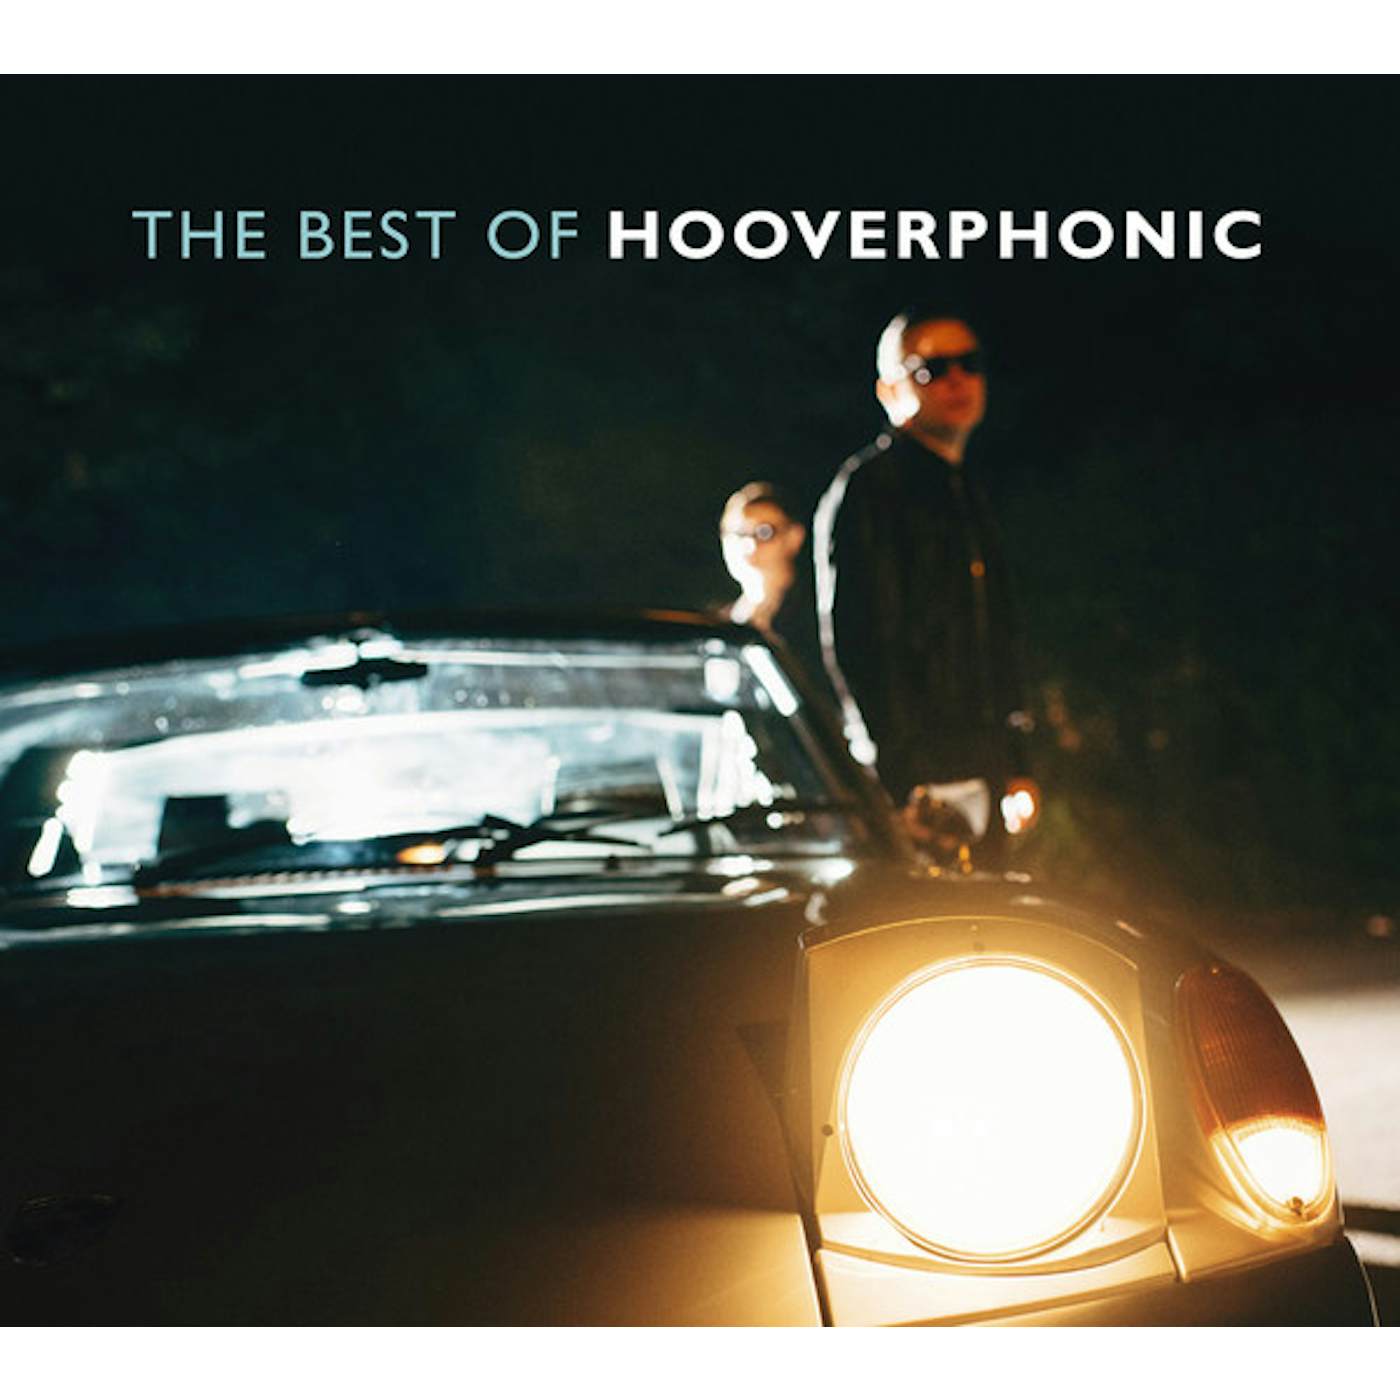 Best Of Hooverphonic (3LP/180G/DELUXE TRI-FOLD GATEFOLD SLEEVE WITH GLOSS LAMINATE) Vinyl Record